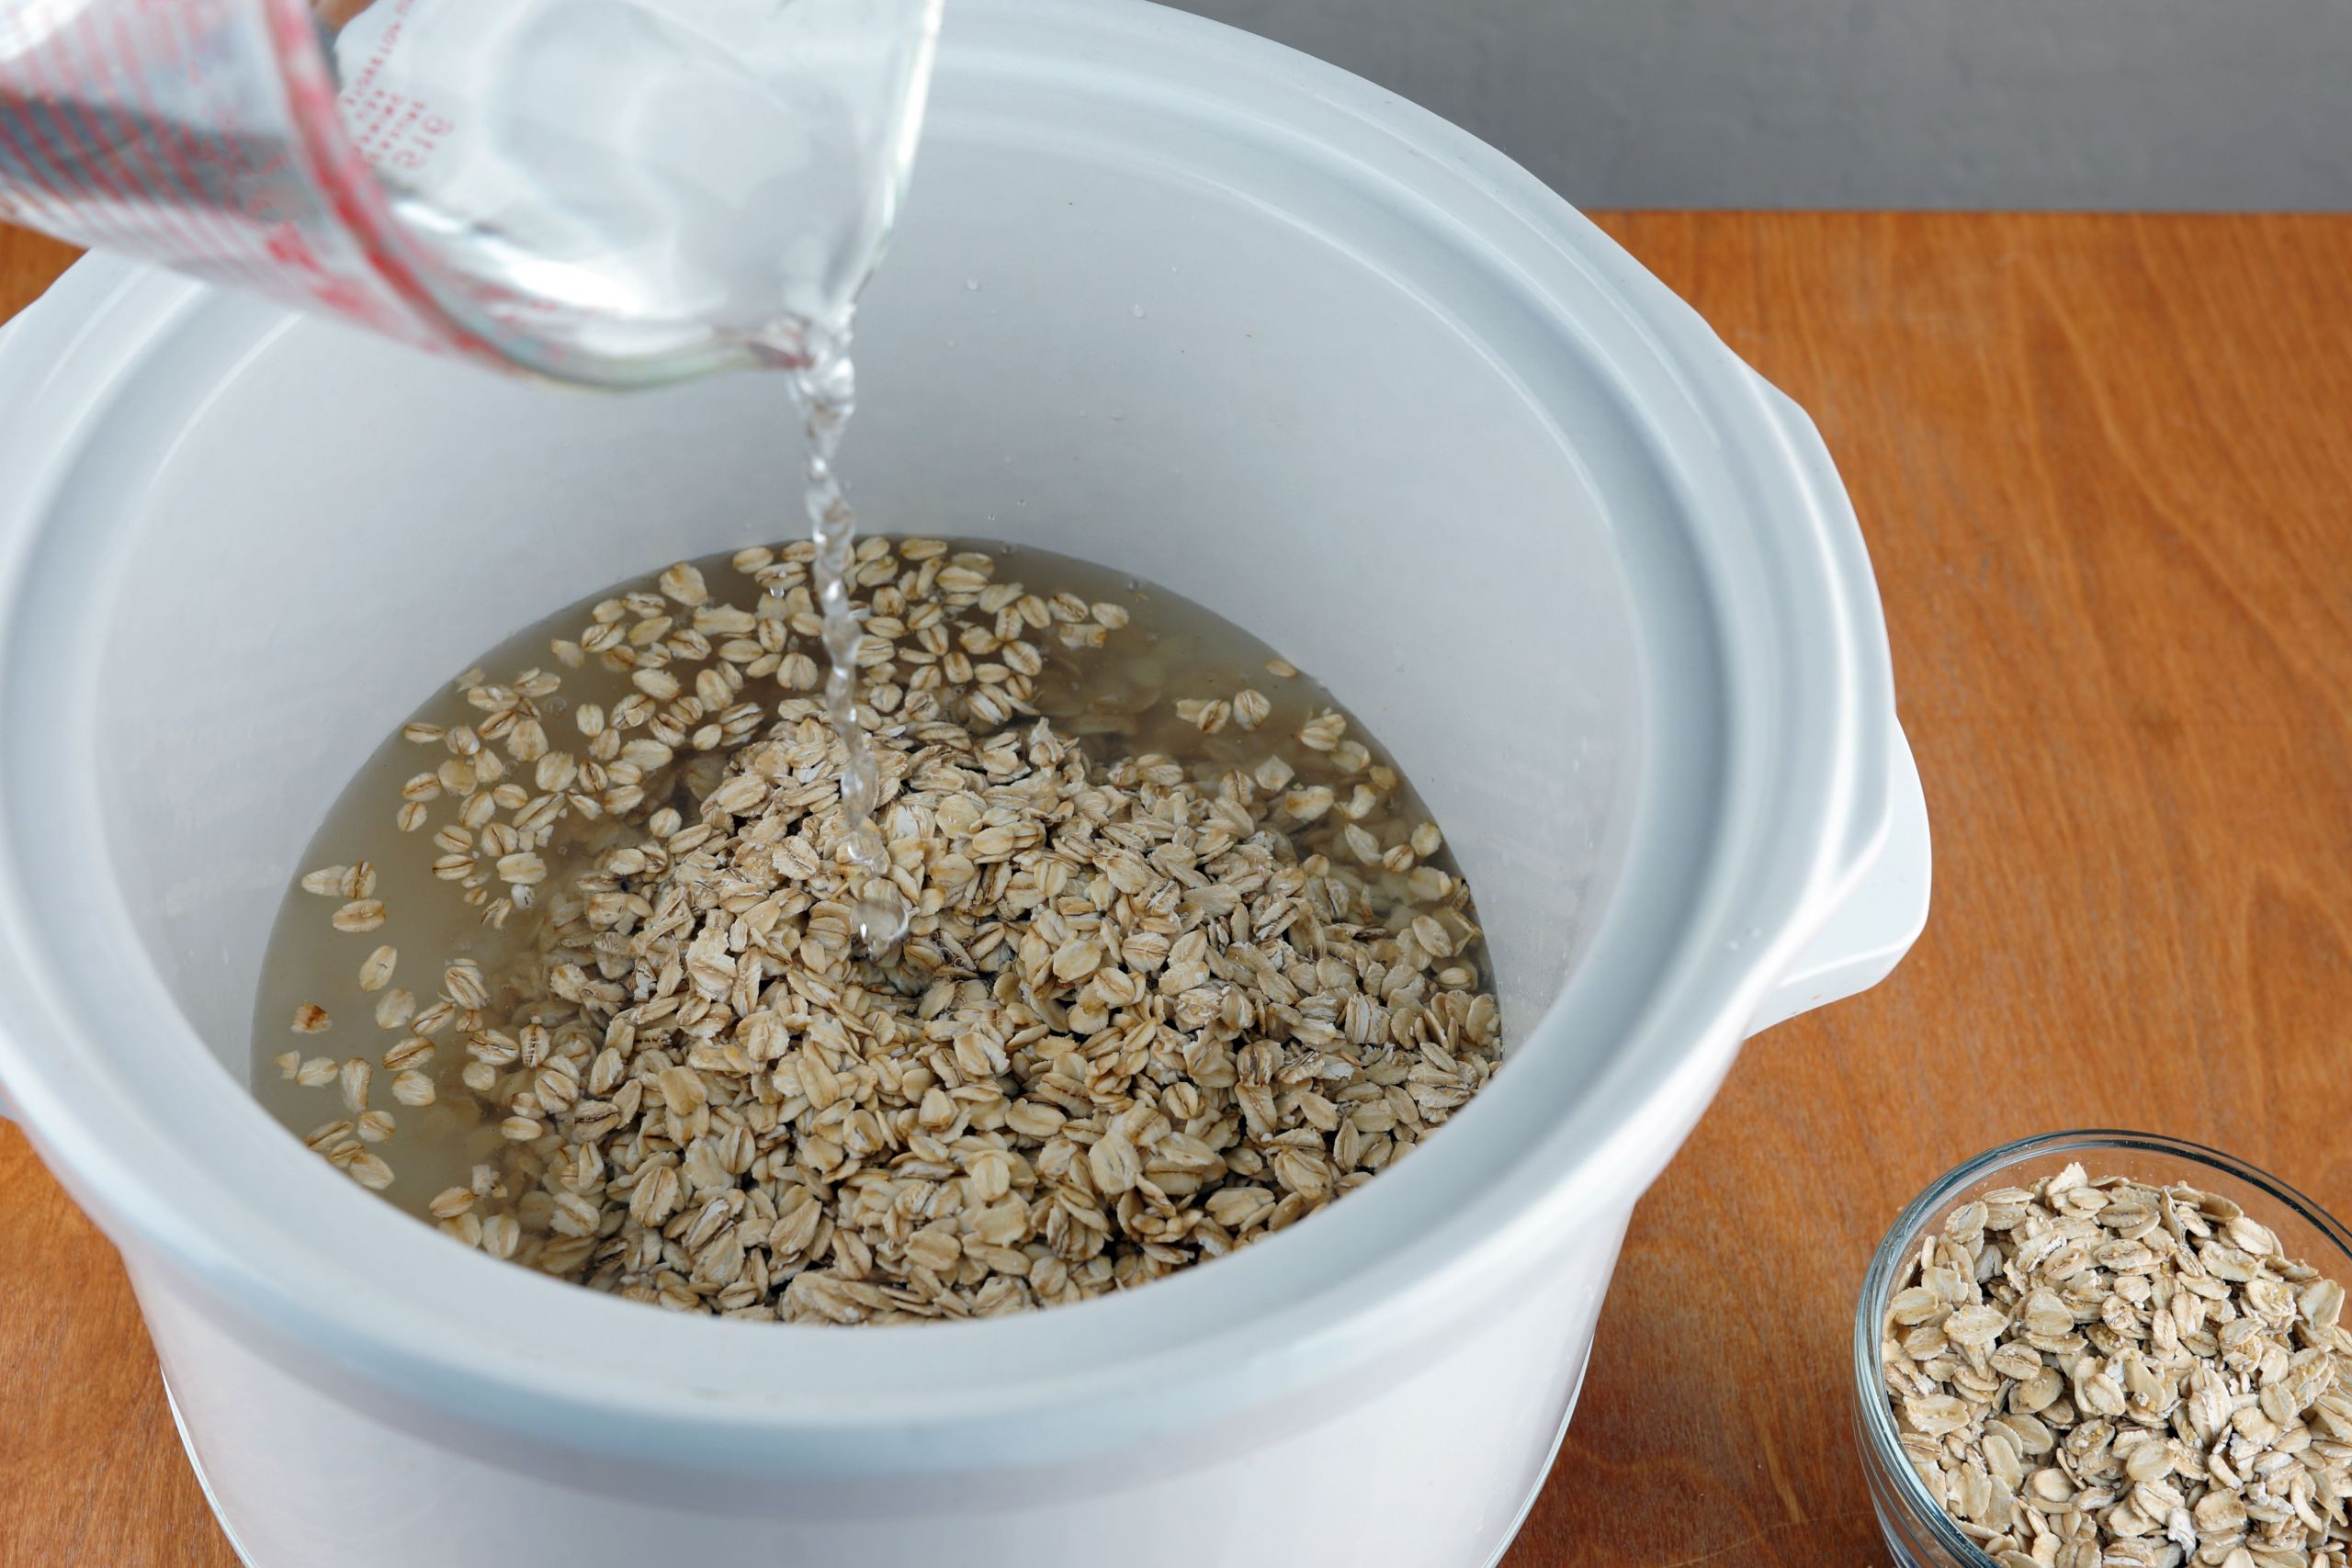 Slow Cooker Oatmeal Rolled Oats
 How to Cook Rolled Oats in a Crock Pot in 2019